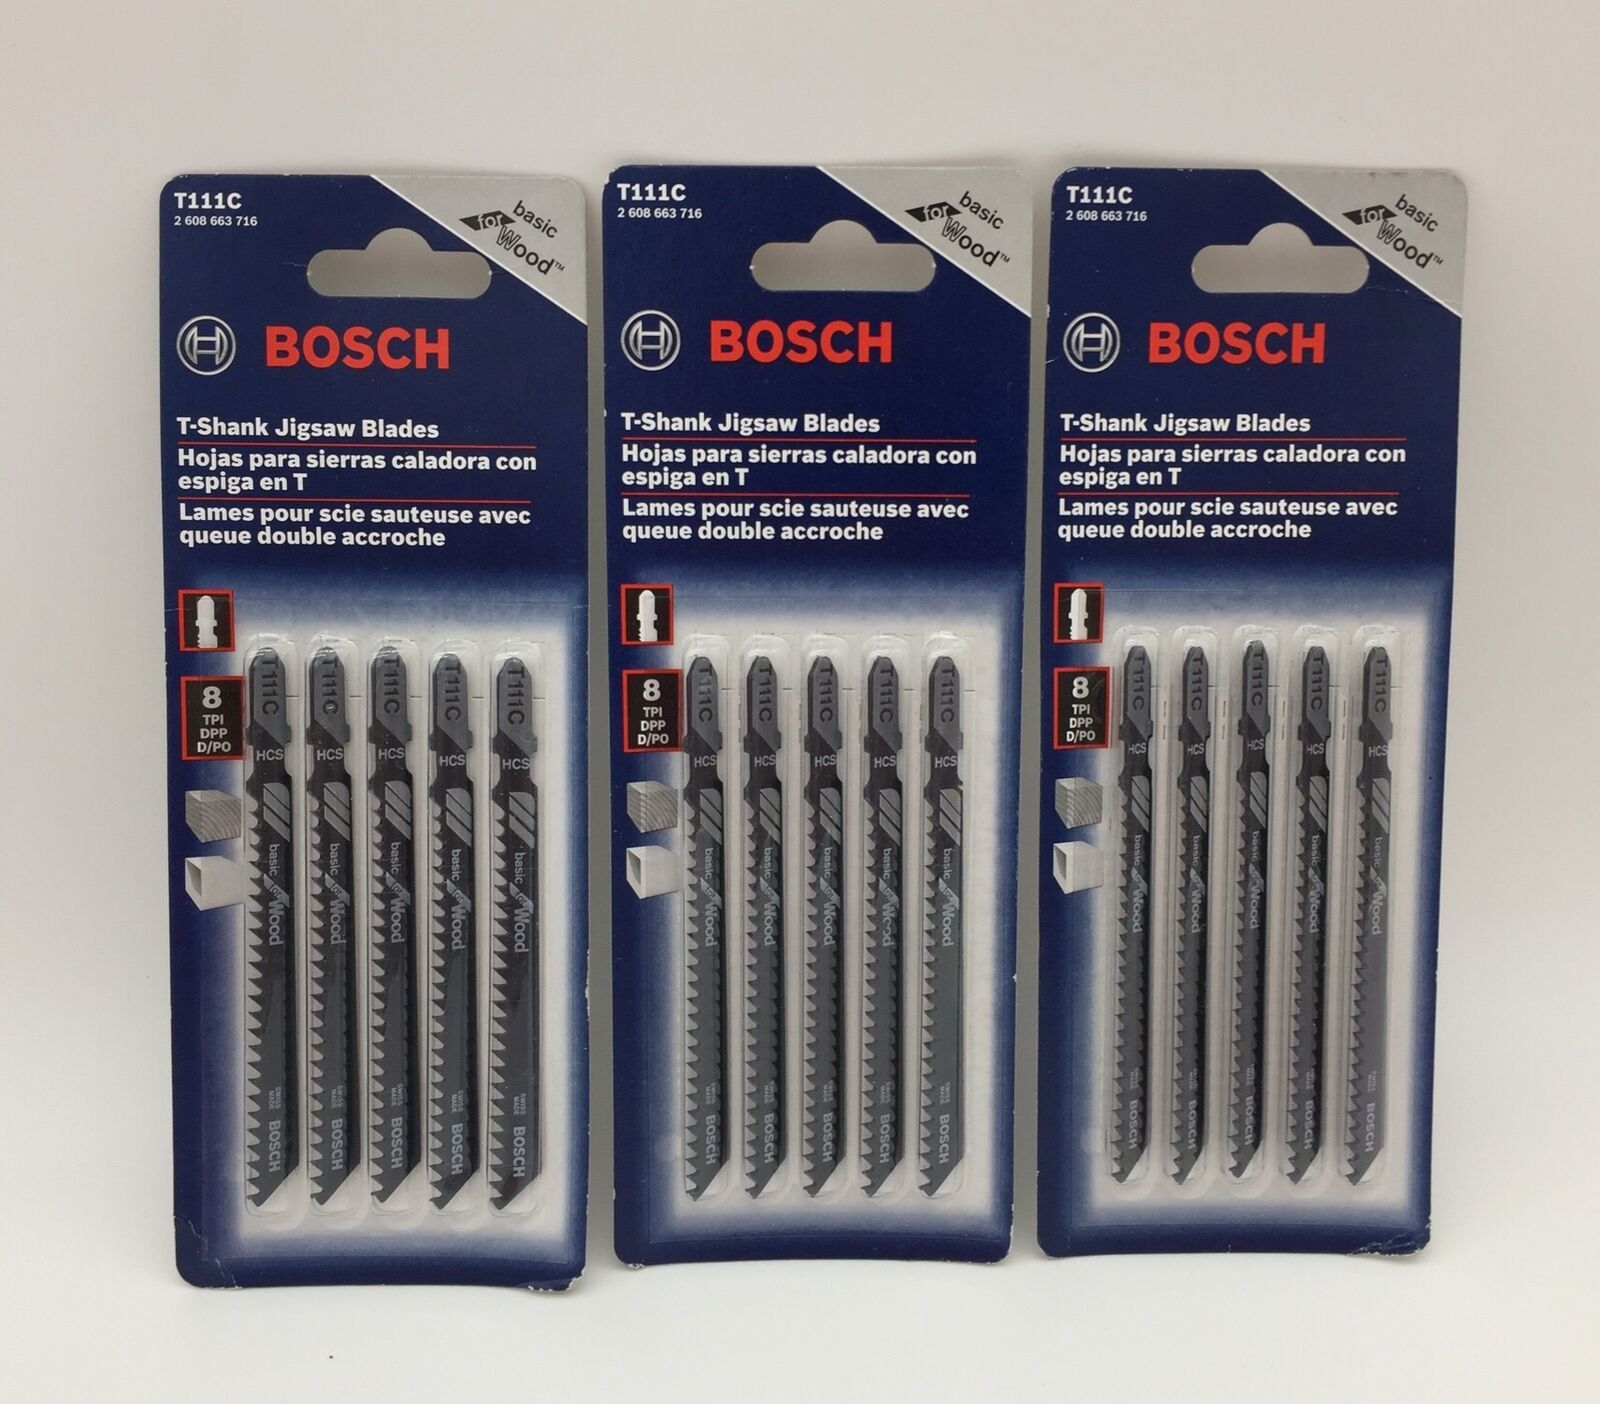 Primary image for Bosch T111C  4" 8TPI Basic for Wood Jig T-Shank Saw Blade Pack of 3